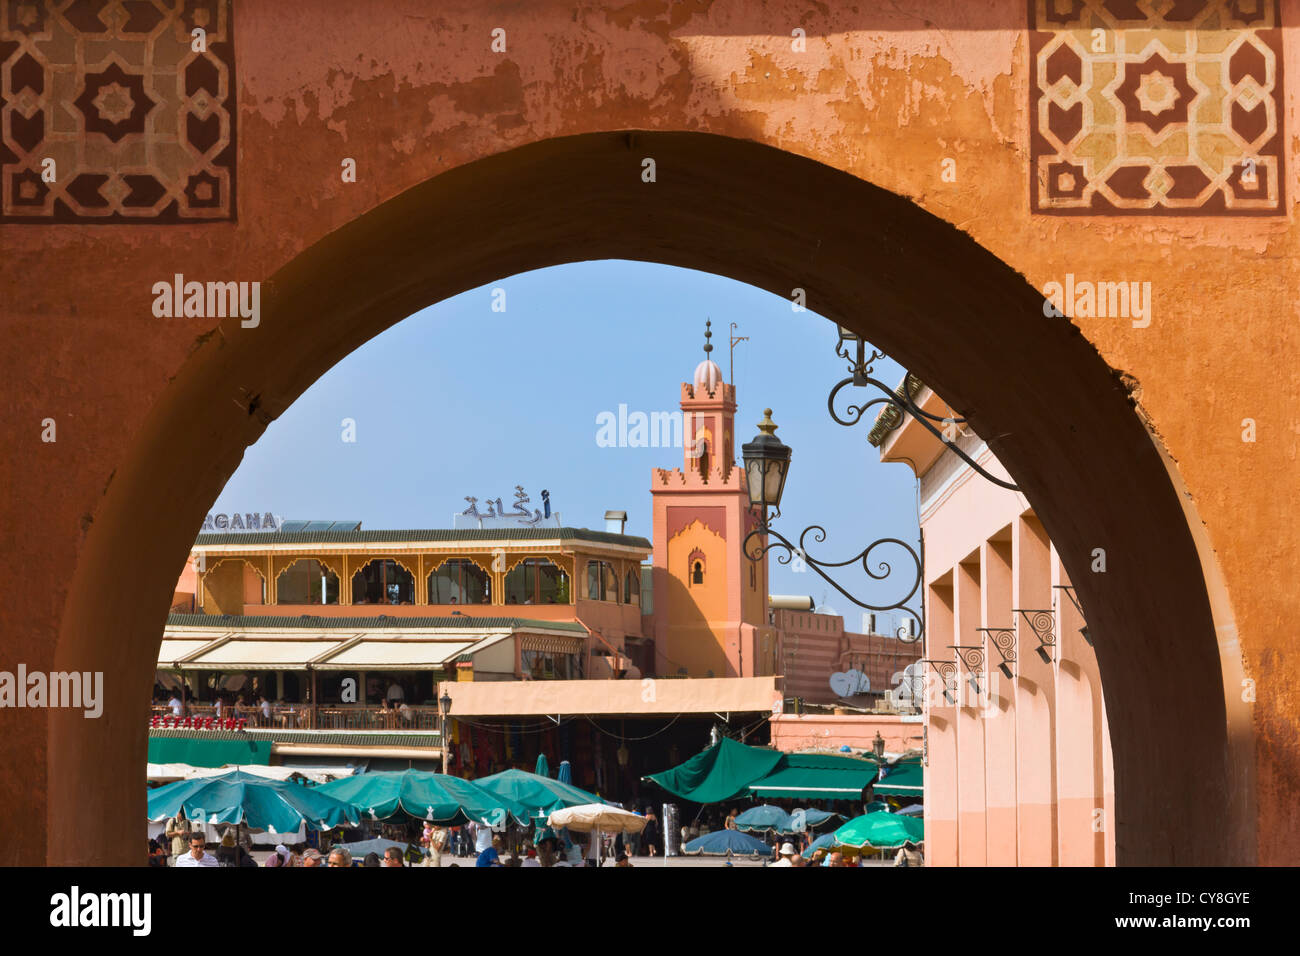 Jema al-Fna Square and Koutoubia Mosque in Marrakech, Morocco Stock Photo